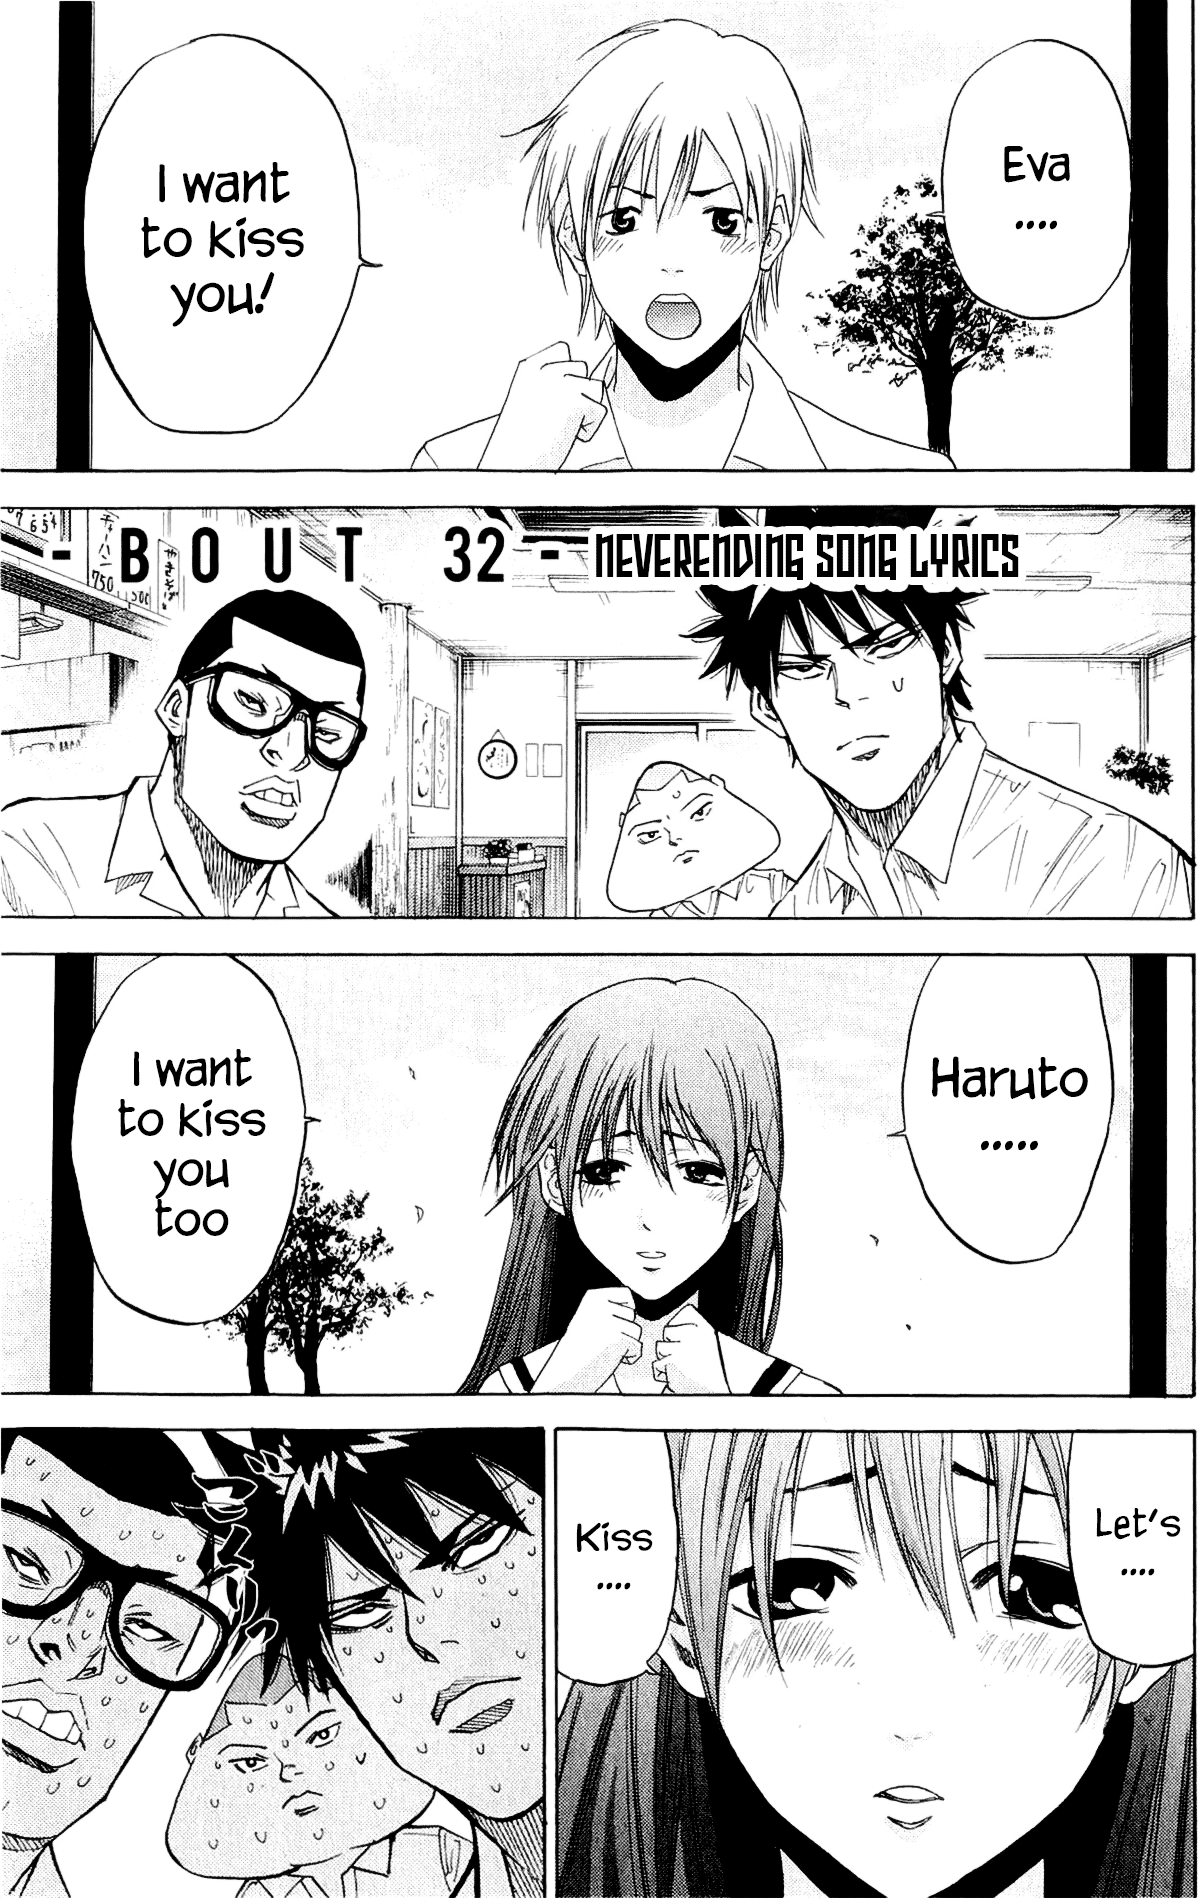 A-bout! Vol.4 Ch.32